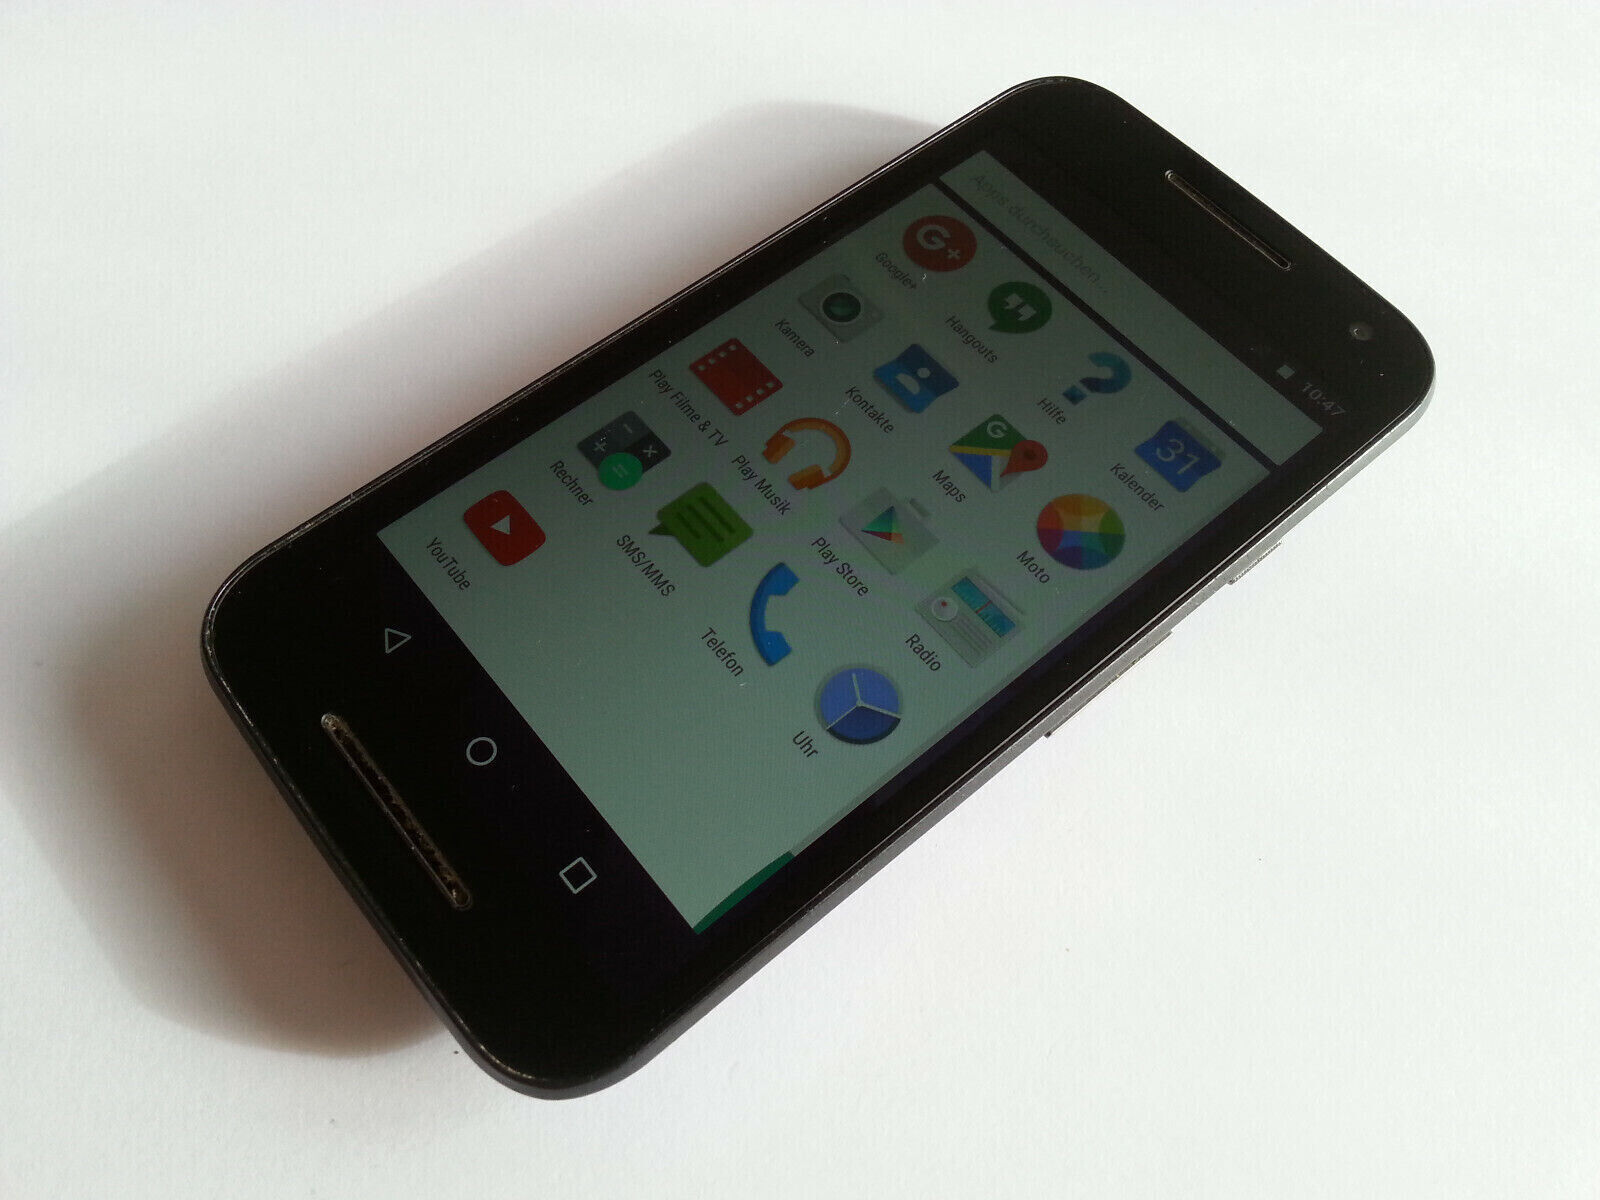 moto-g-which-version-do-i-have